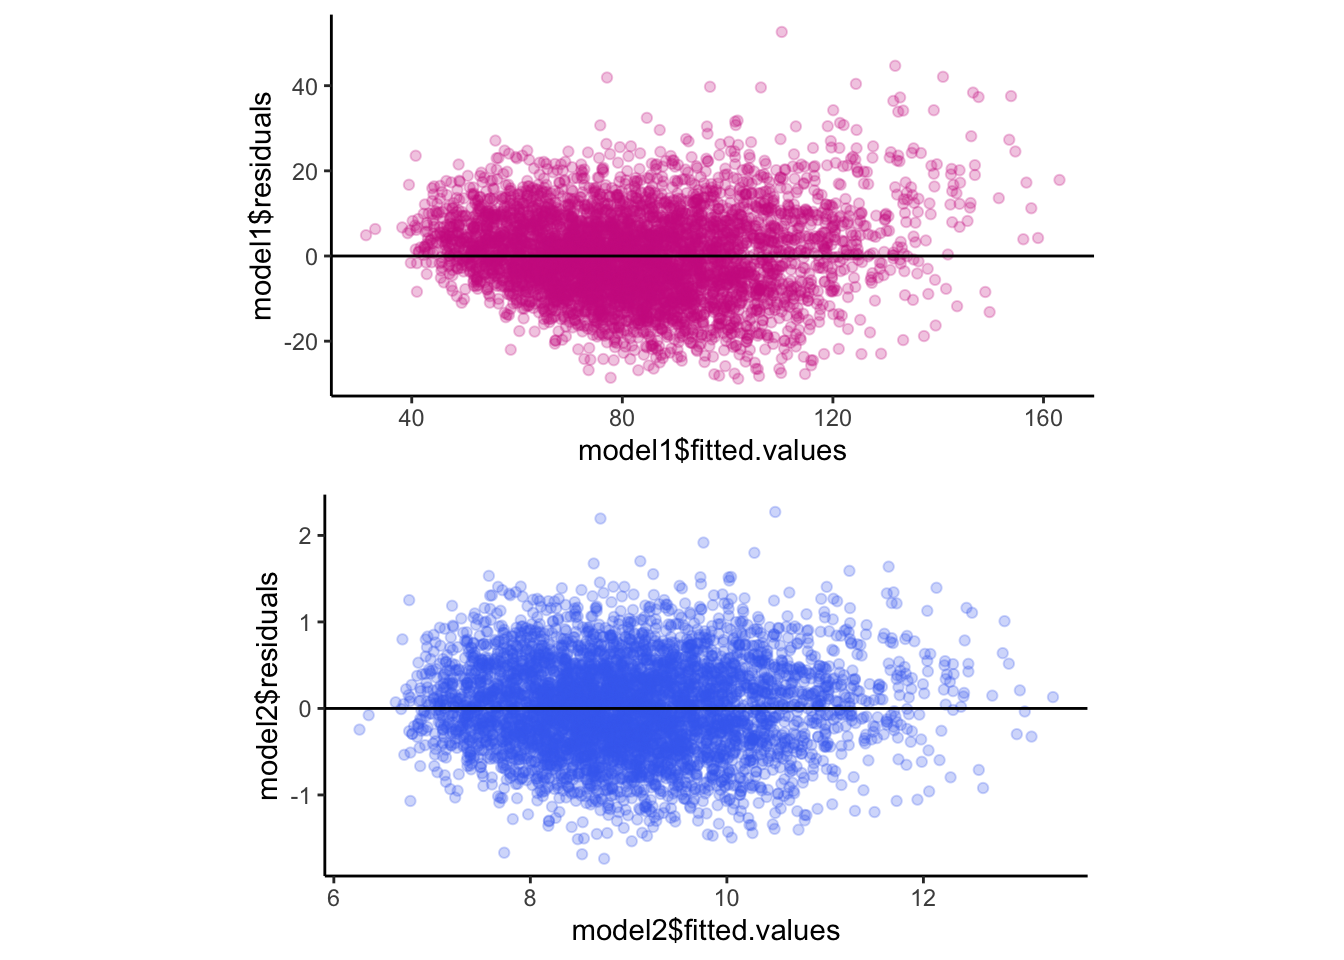 Residuals vs. fitted values as a check for homoscedasticity.